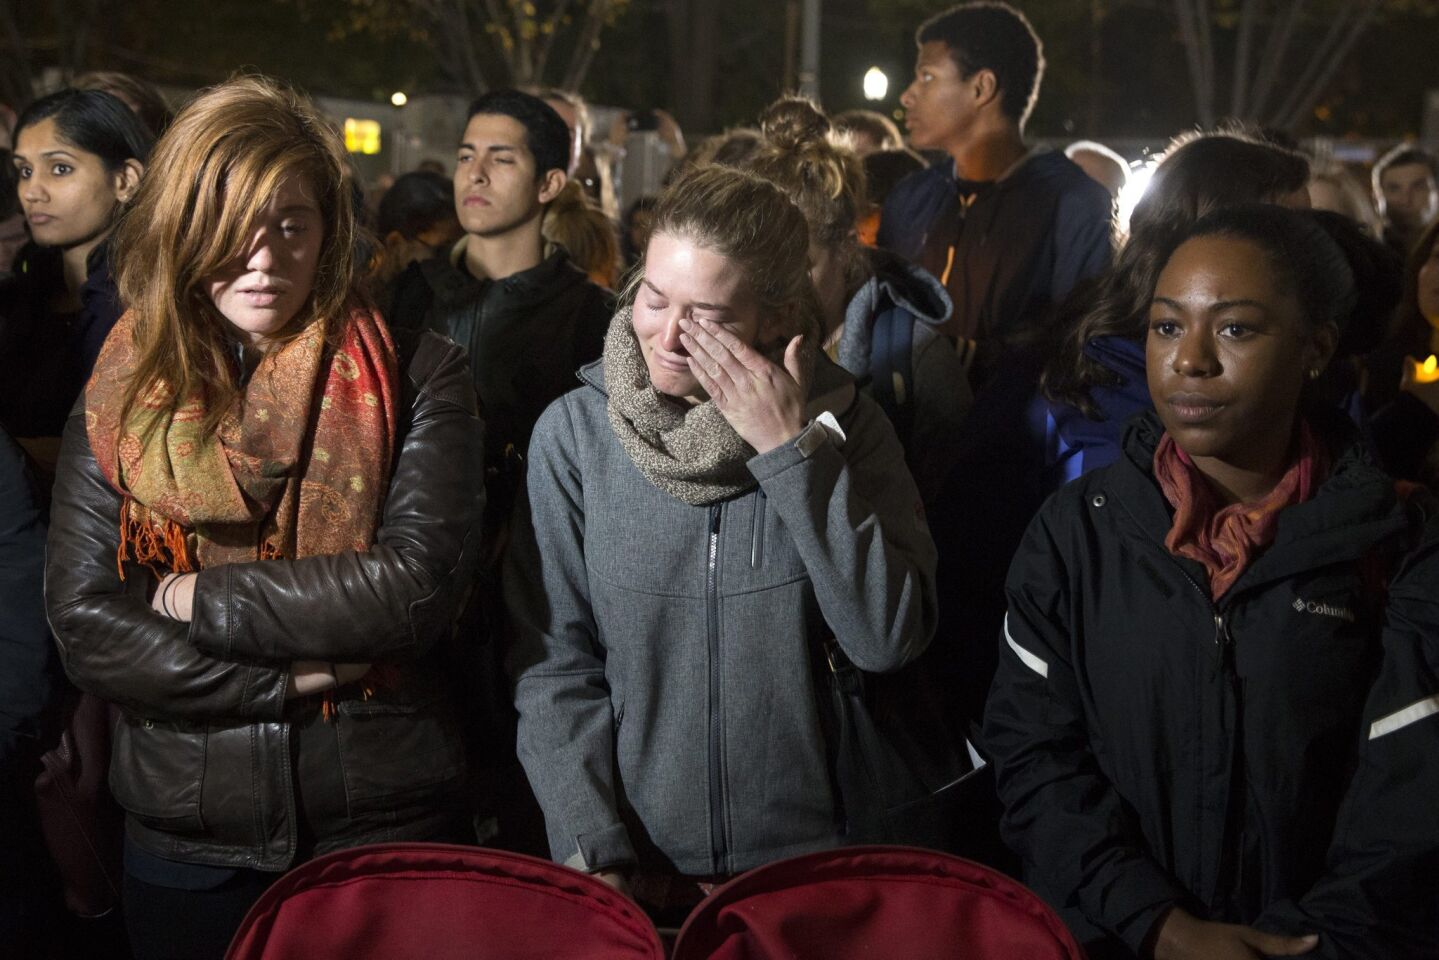 Tears are shed at the postelection candlelight vigil outside the White House.